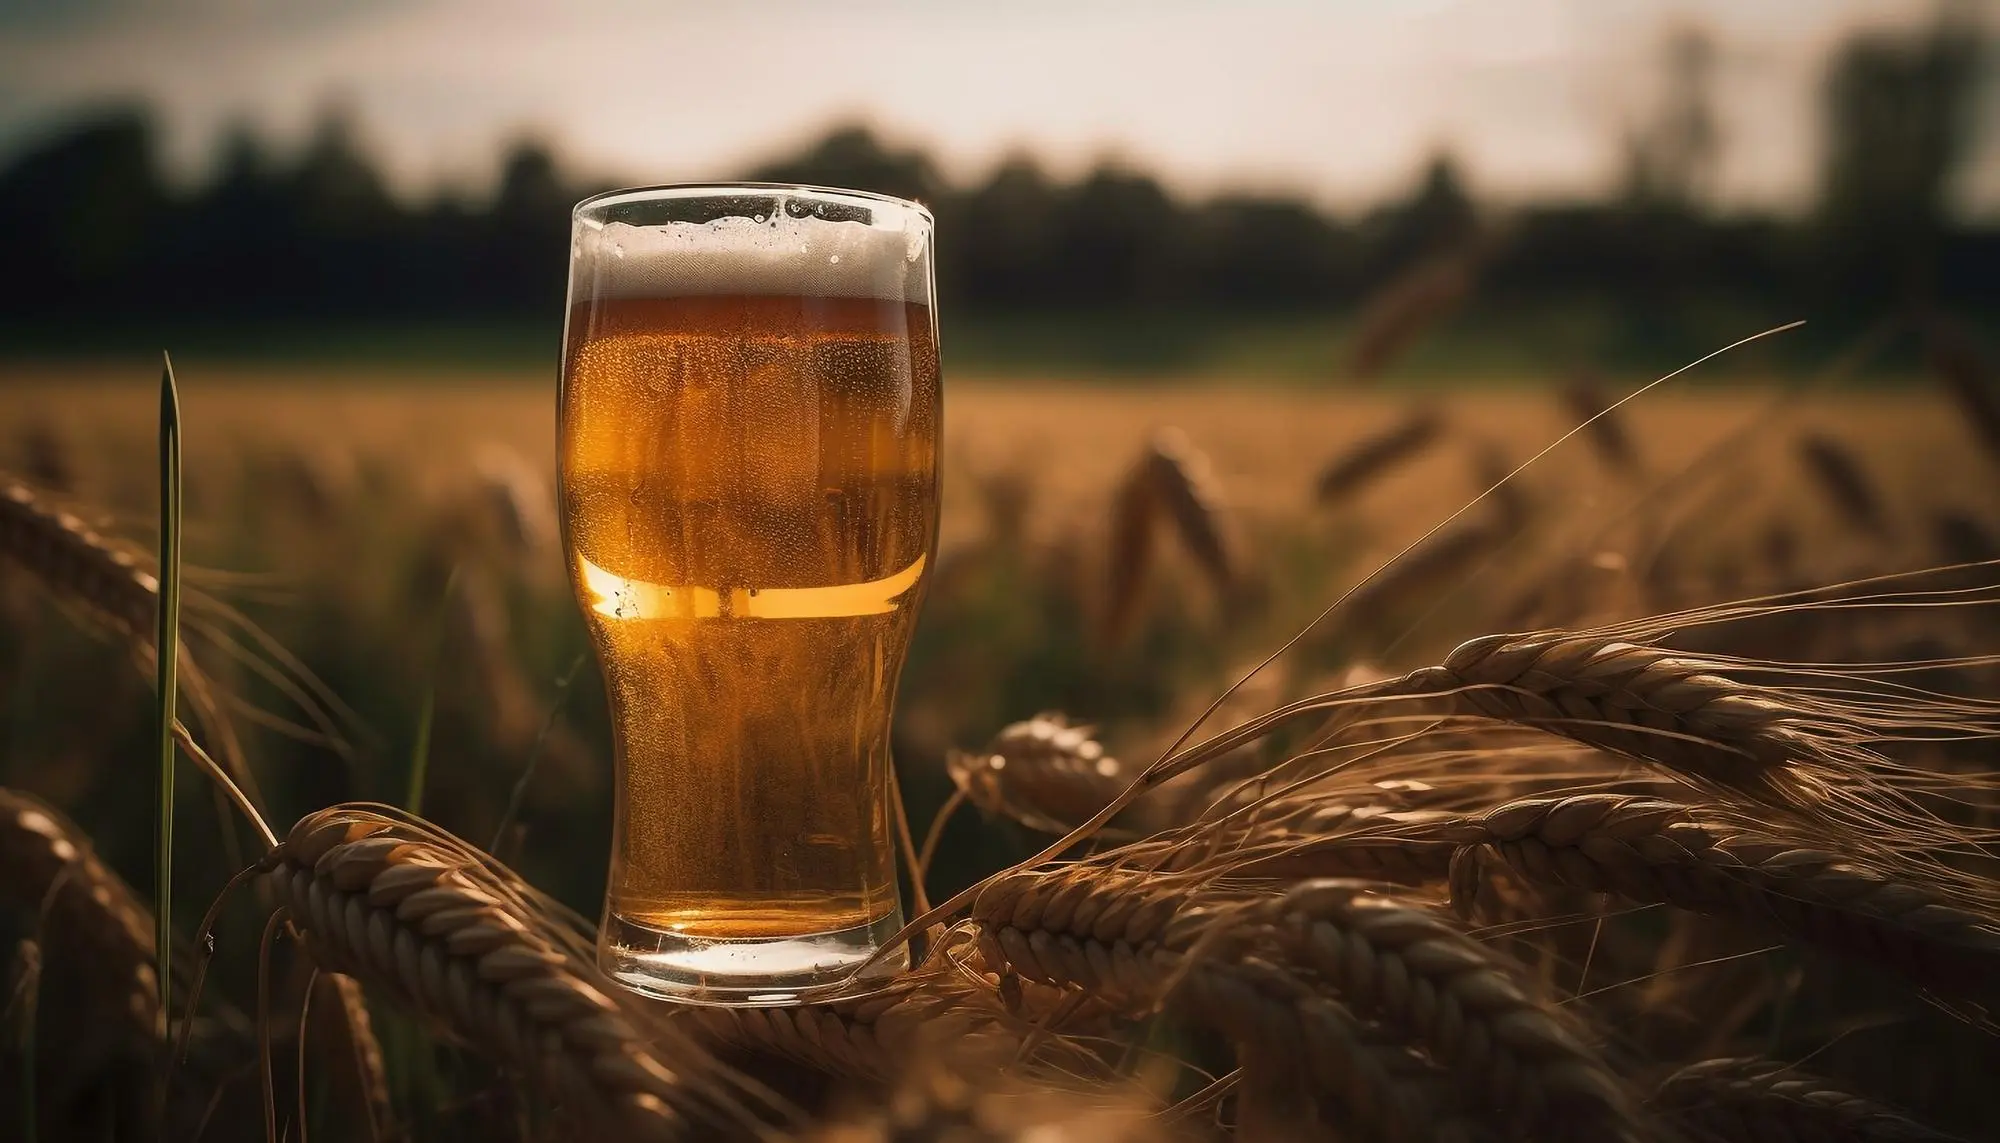 Cheers to Goa: The Frothy Tale of Beer in India